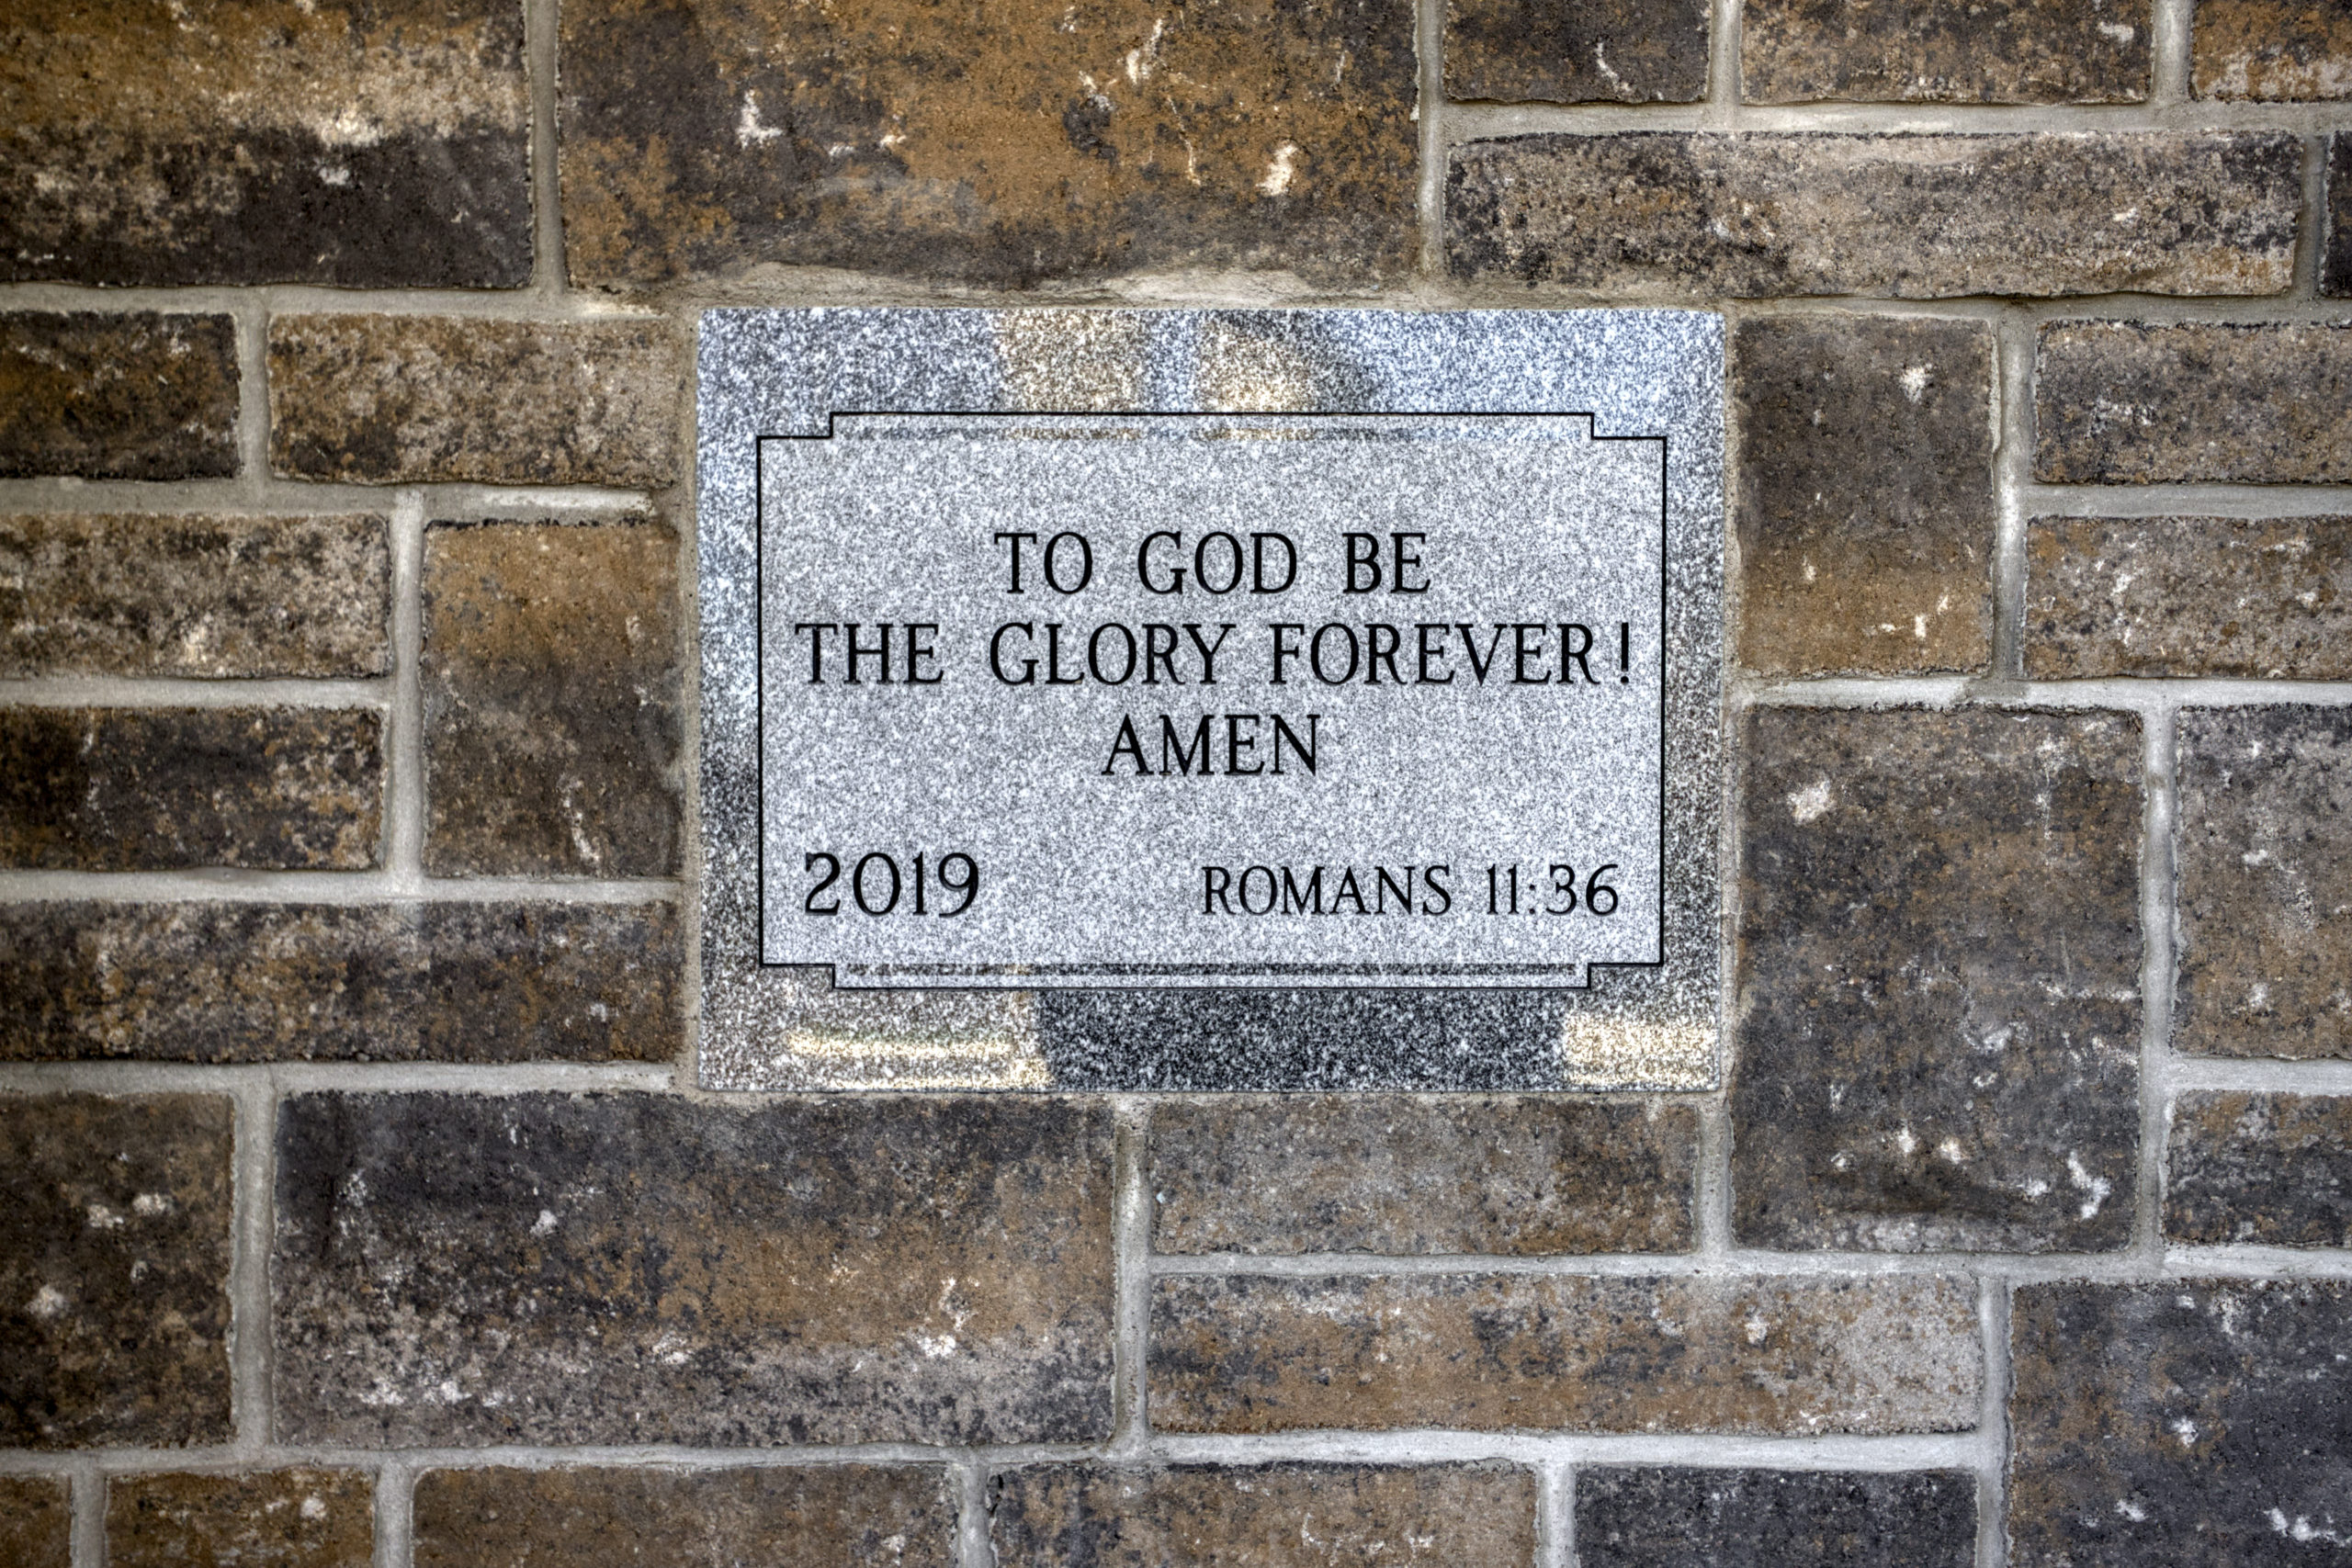 the cornerstone of the addition to Water Street Church